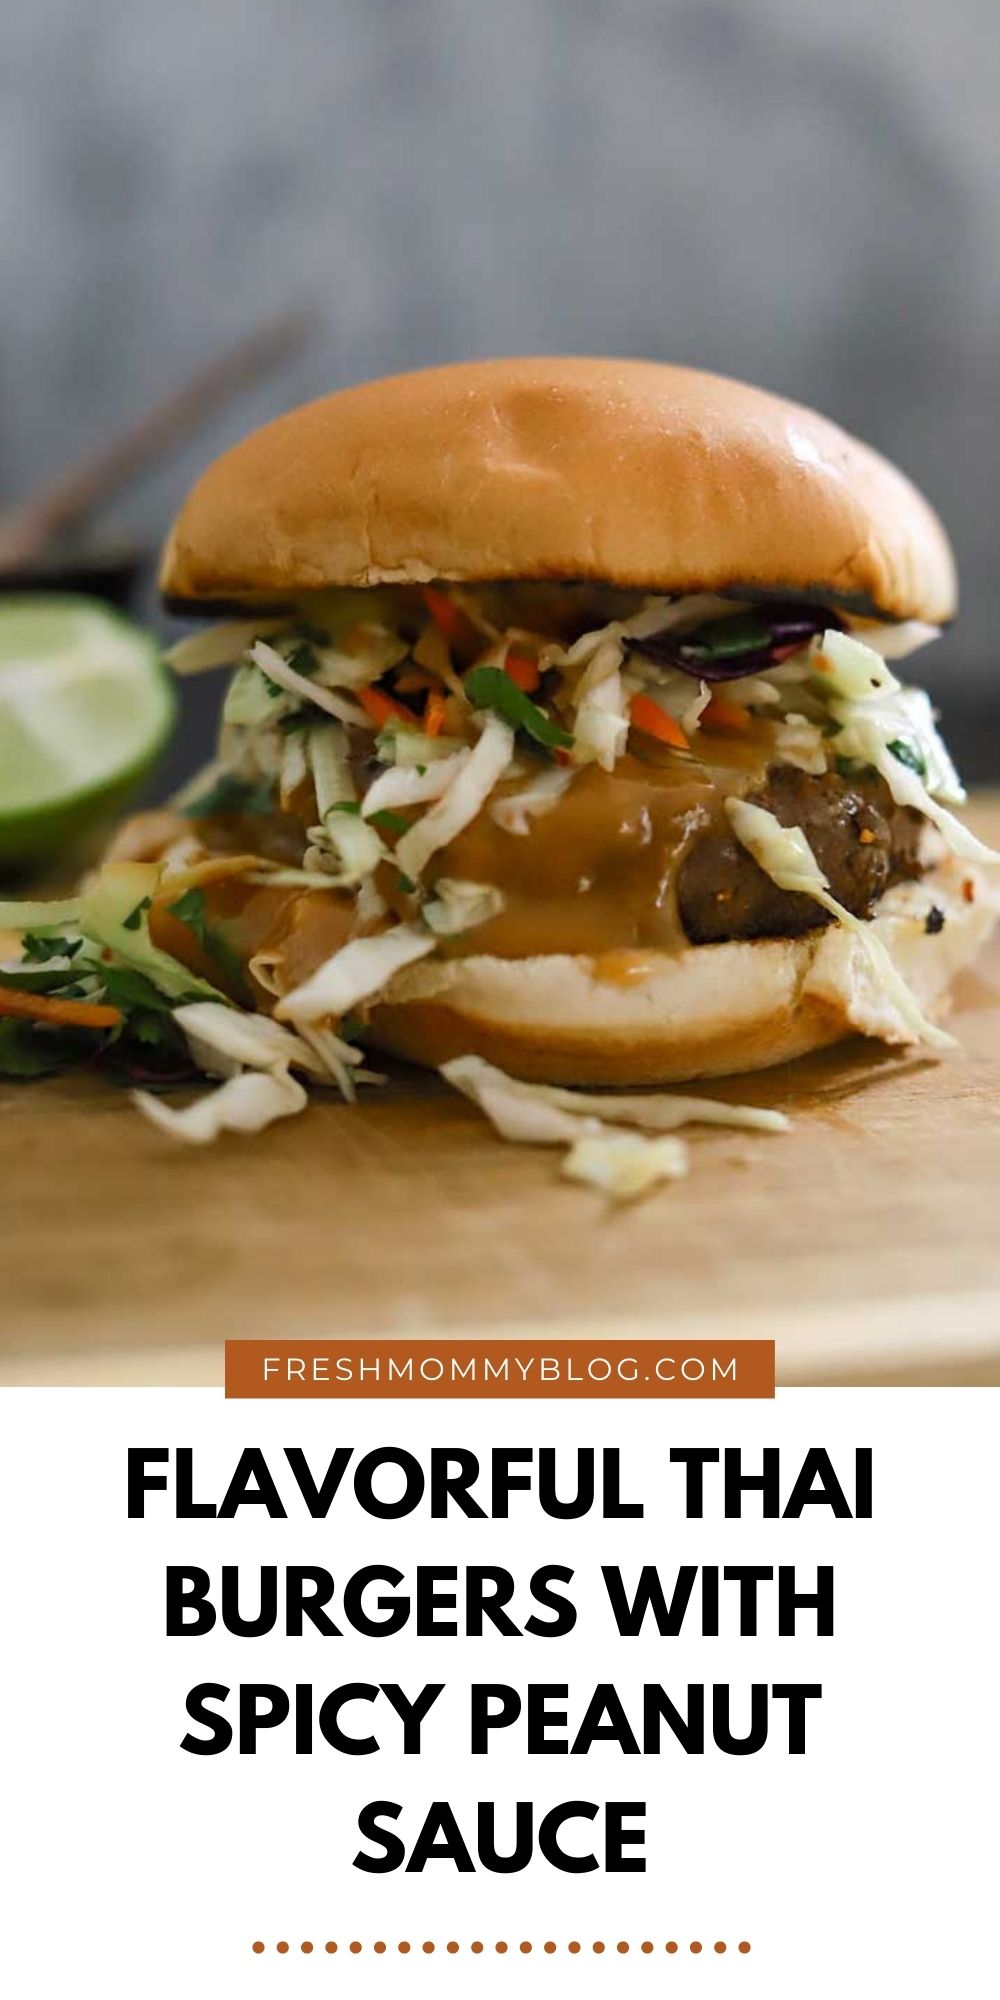 Thai Burgers With Peanut Sauce and 5 Barbeque Side Ideas for delicious family BBQ dinner ideas from top Florida lifestyle and food blogger Tabitha Blue of Fresh Mommy Blog